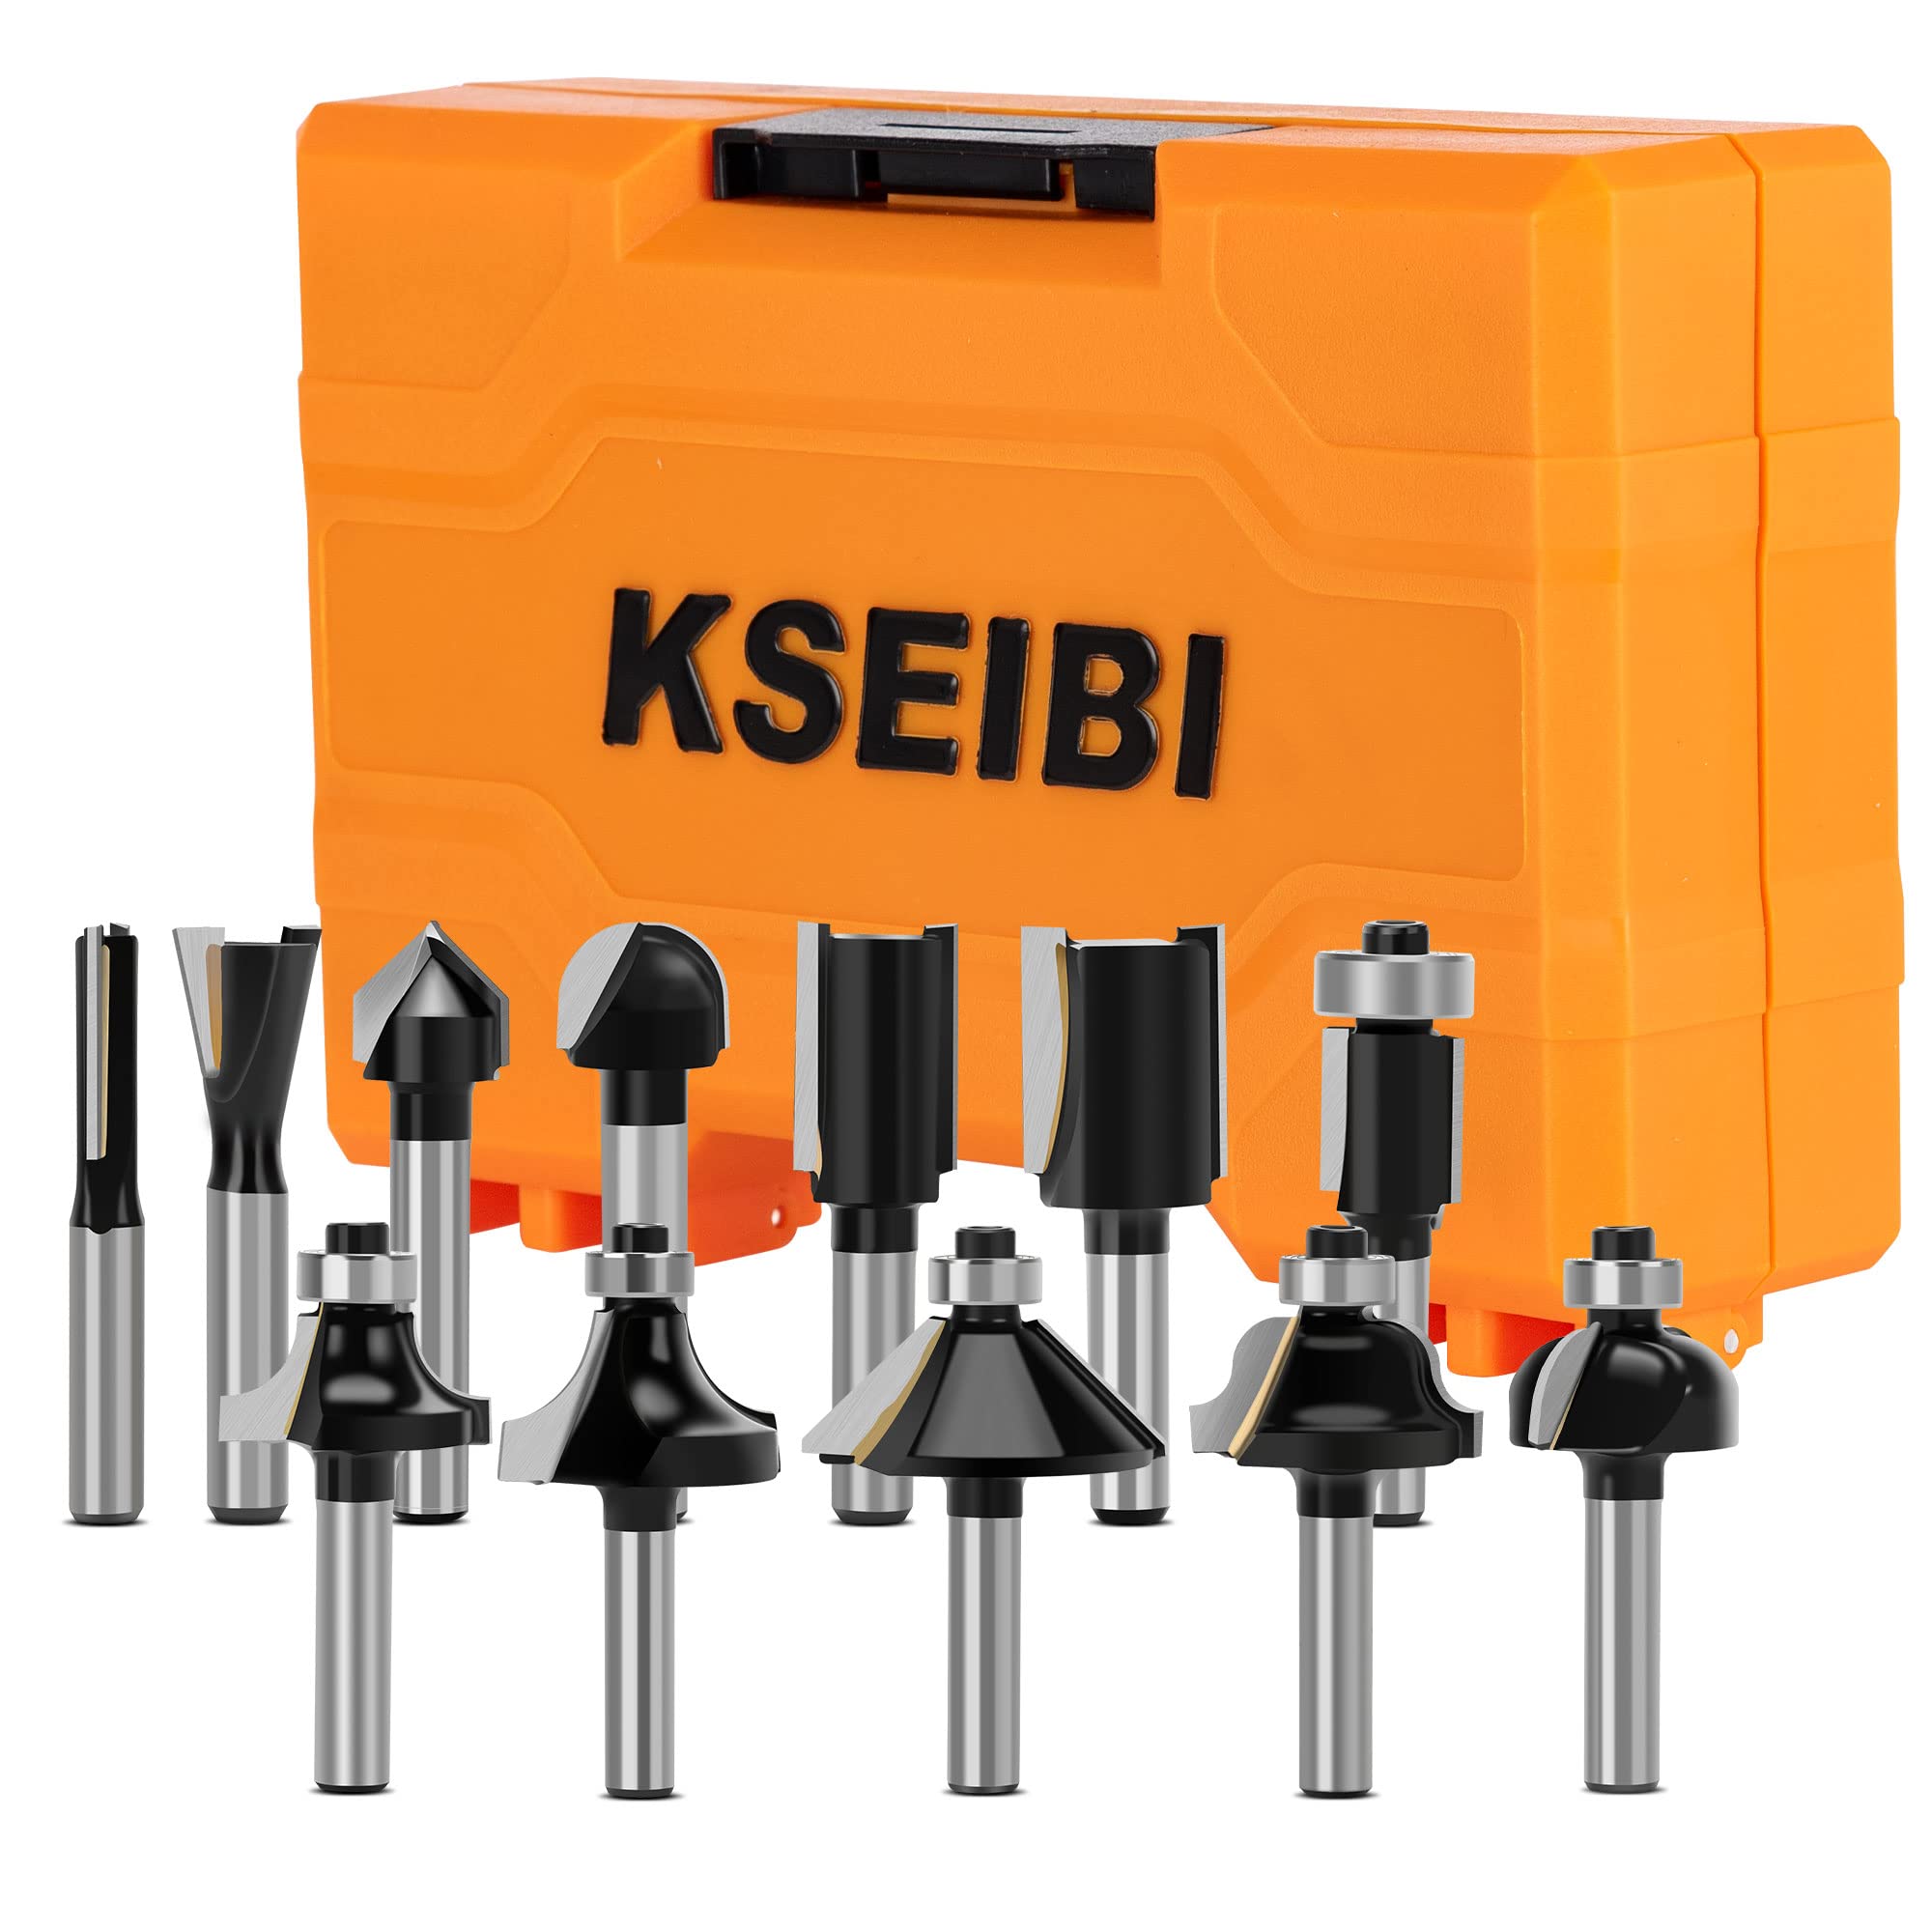 KSEIBI 1/4 Inch Router Bit Set, Tungsten Carbide Tip, Black Powder Coating Finish, for Both Beginners and Simi-Professional Woodworking Job 12 Piece Kit (103119)